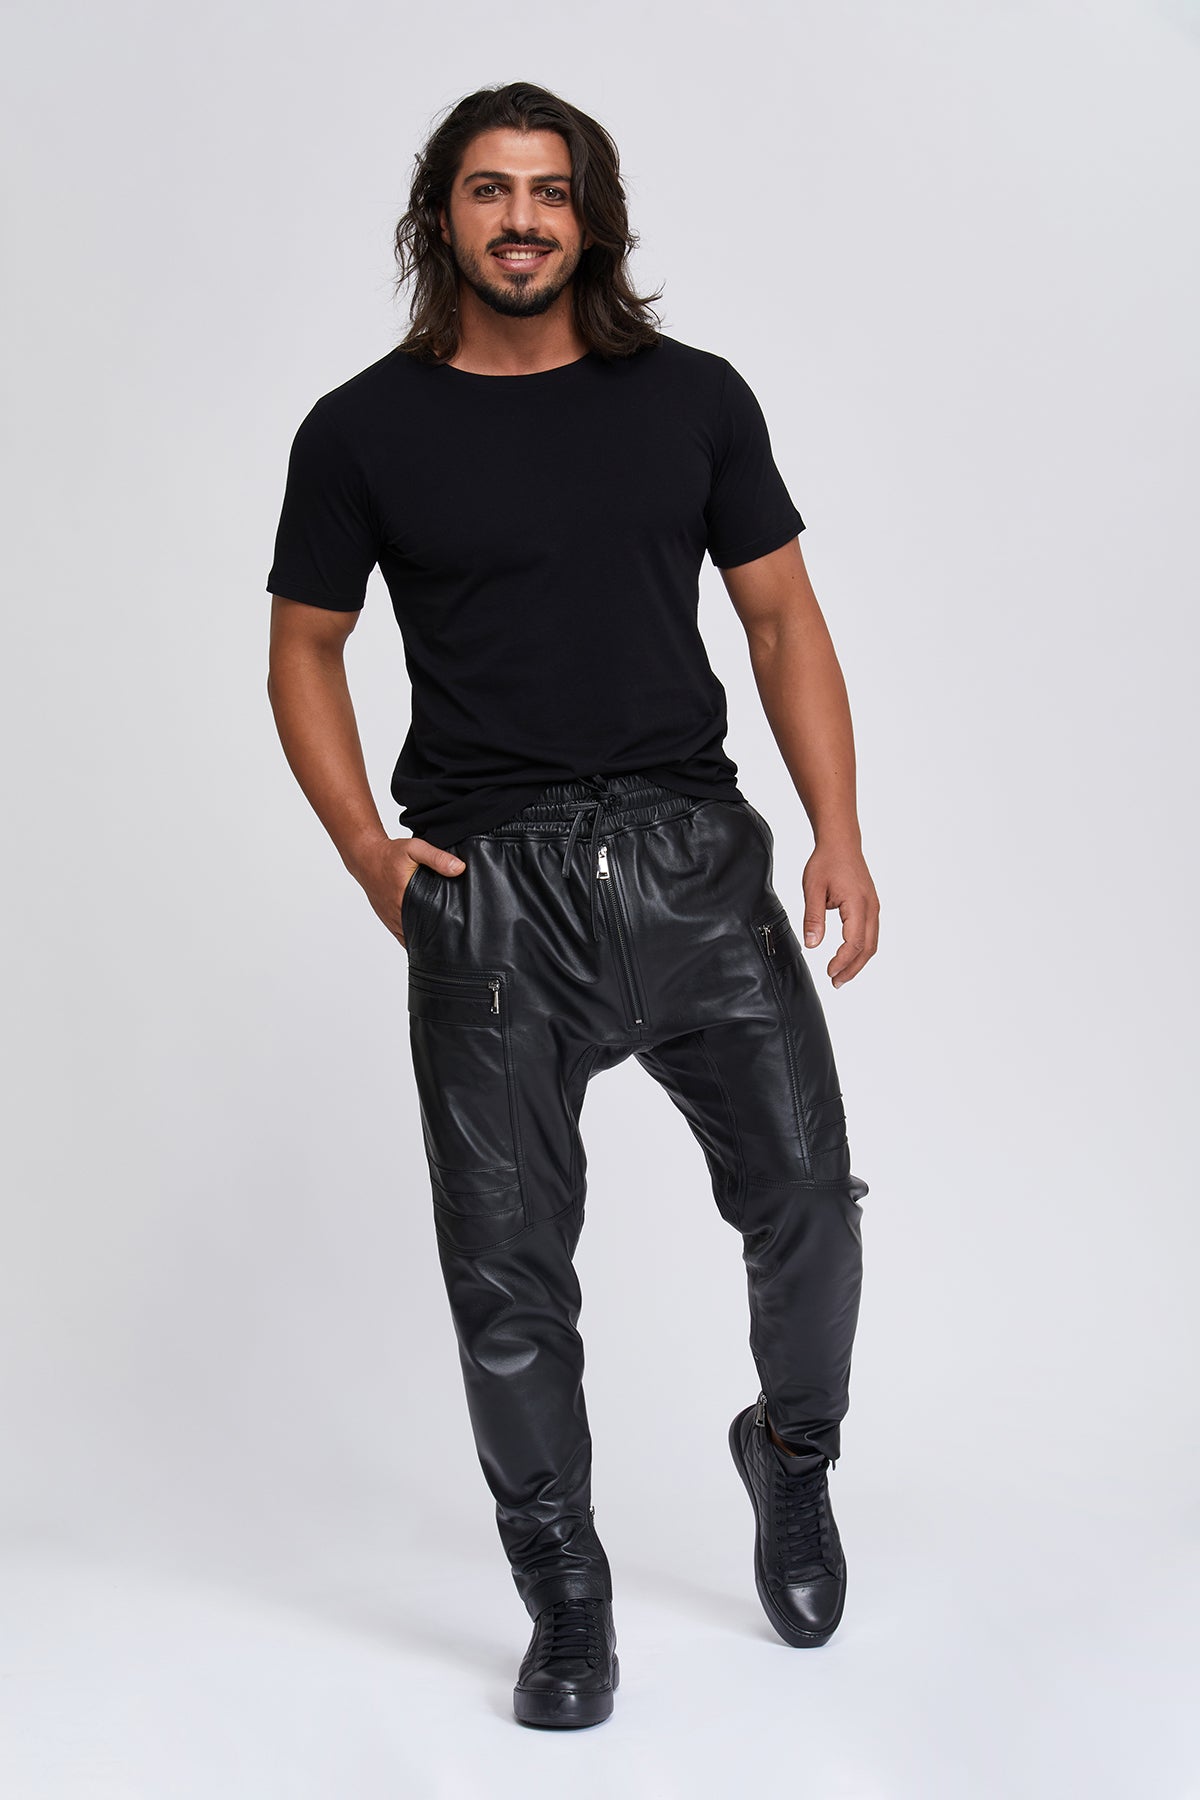 Men's contemporary t-shirts-tops and tees. 100 % Great Quality Turkish Pima cotton. Luxurious, stylish. Huge Winter Sale.